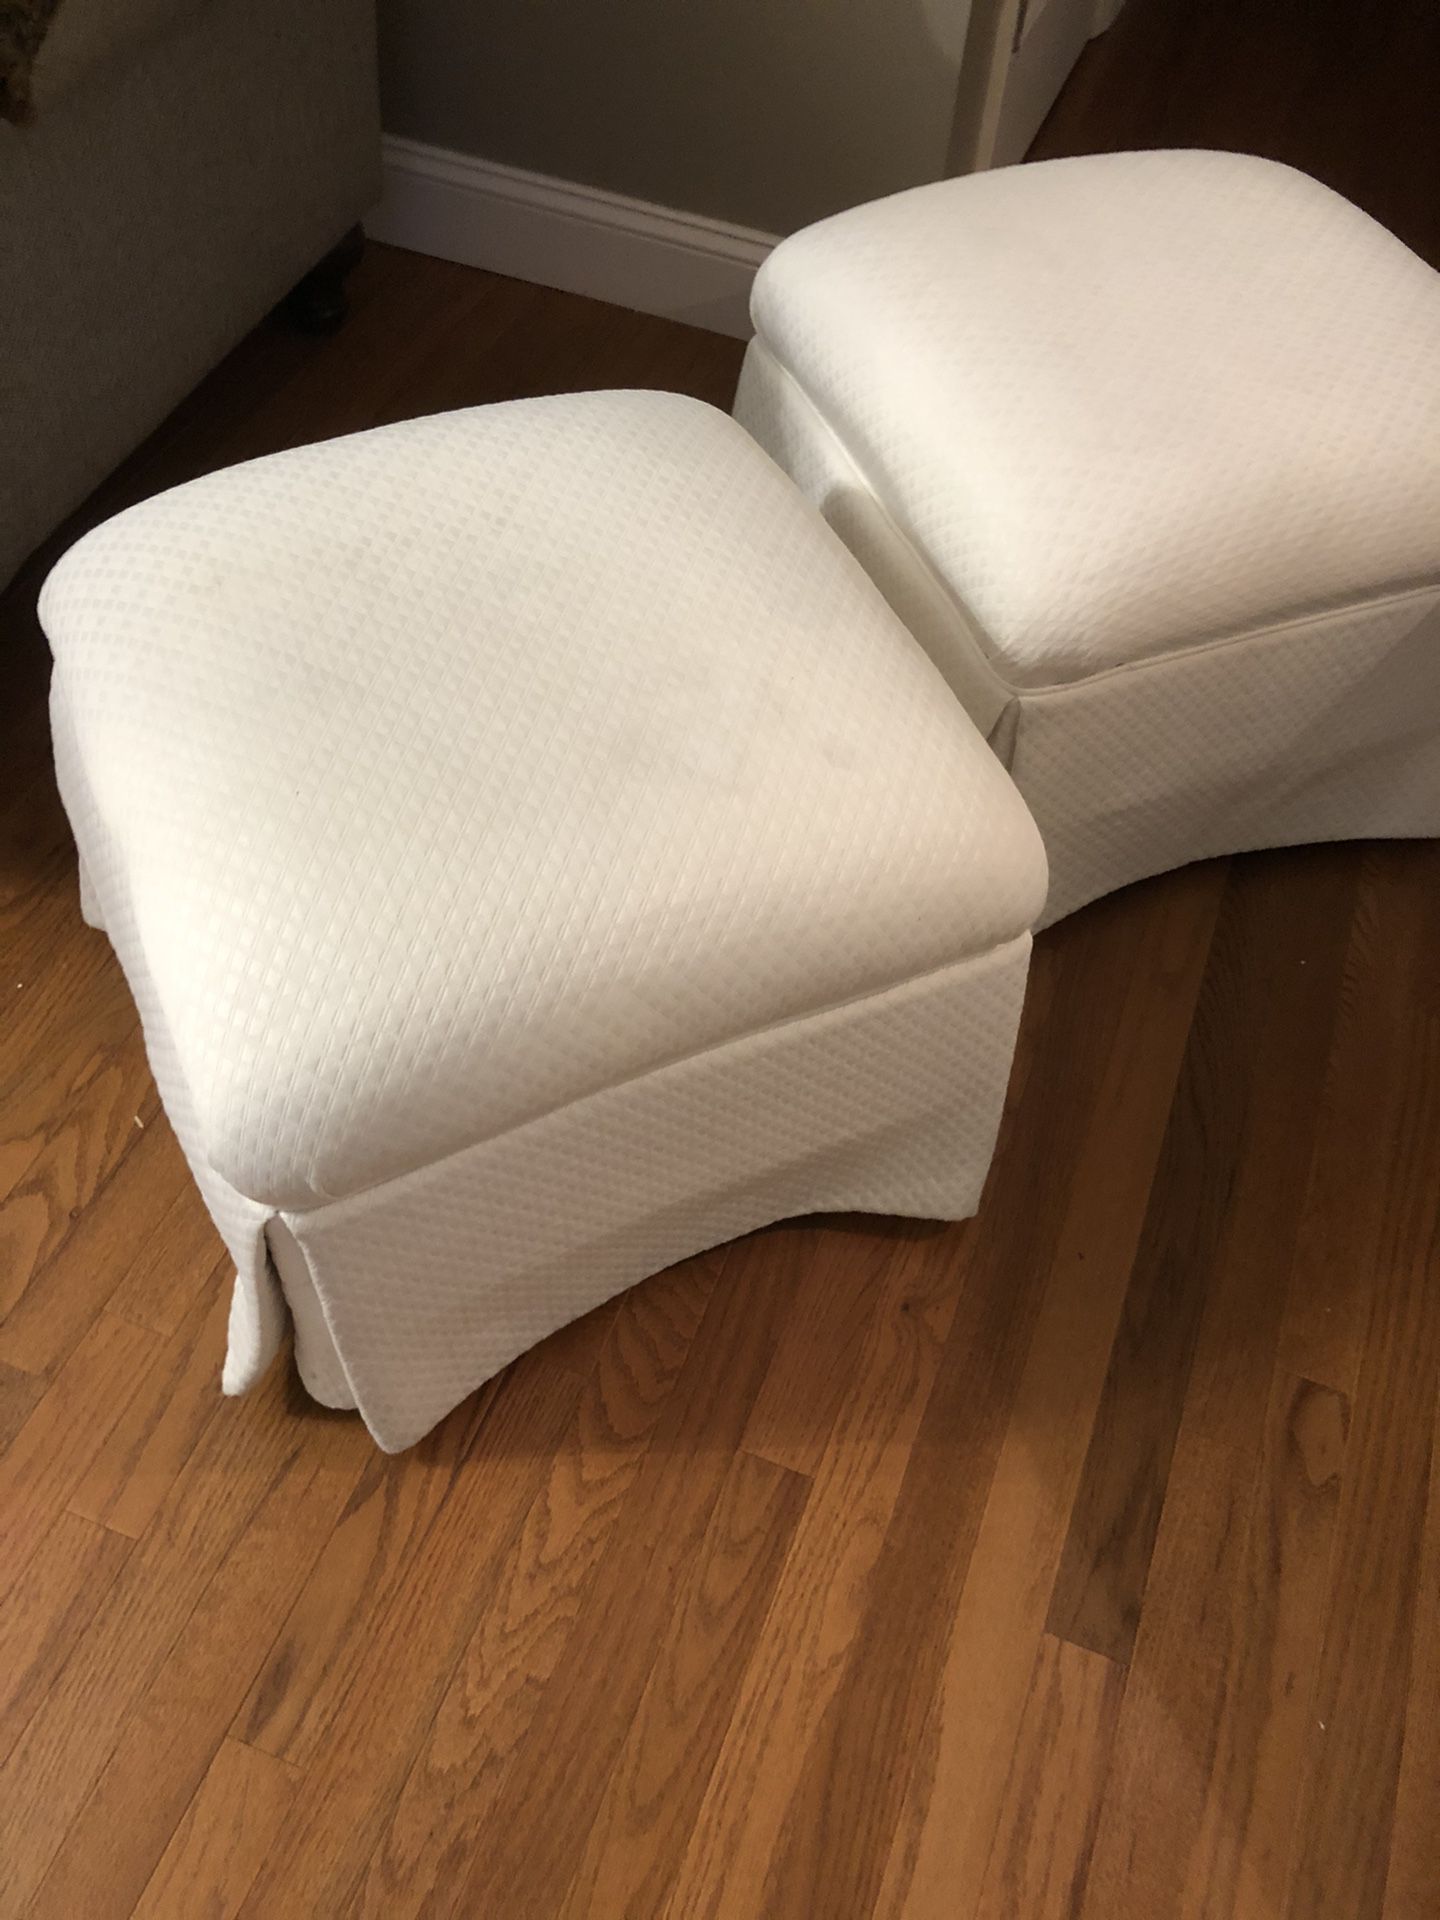 2 Rolling foot stools